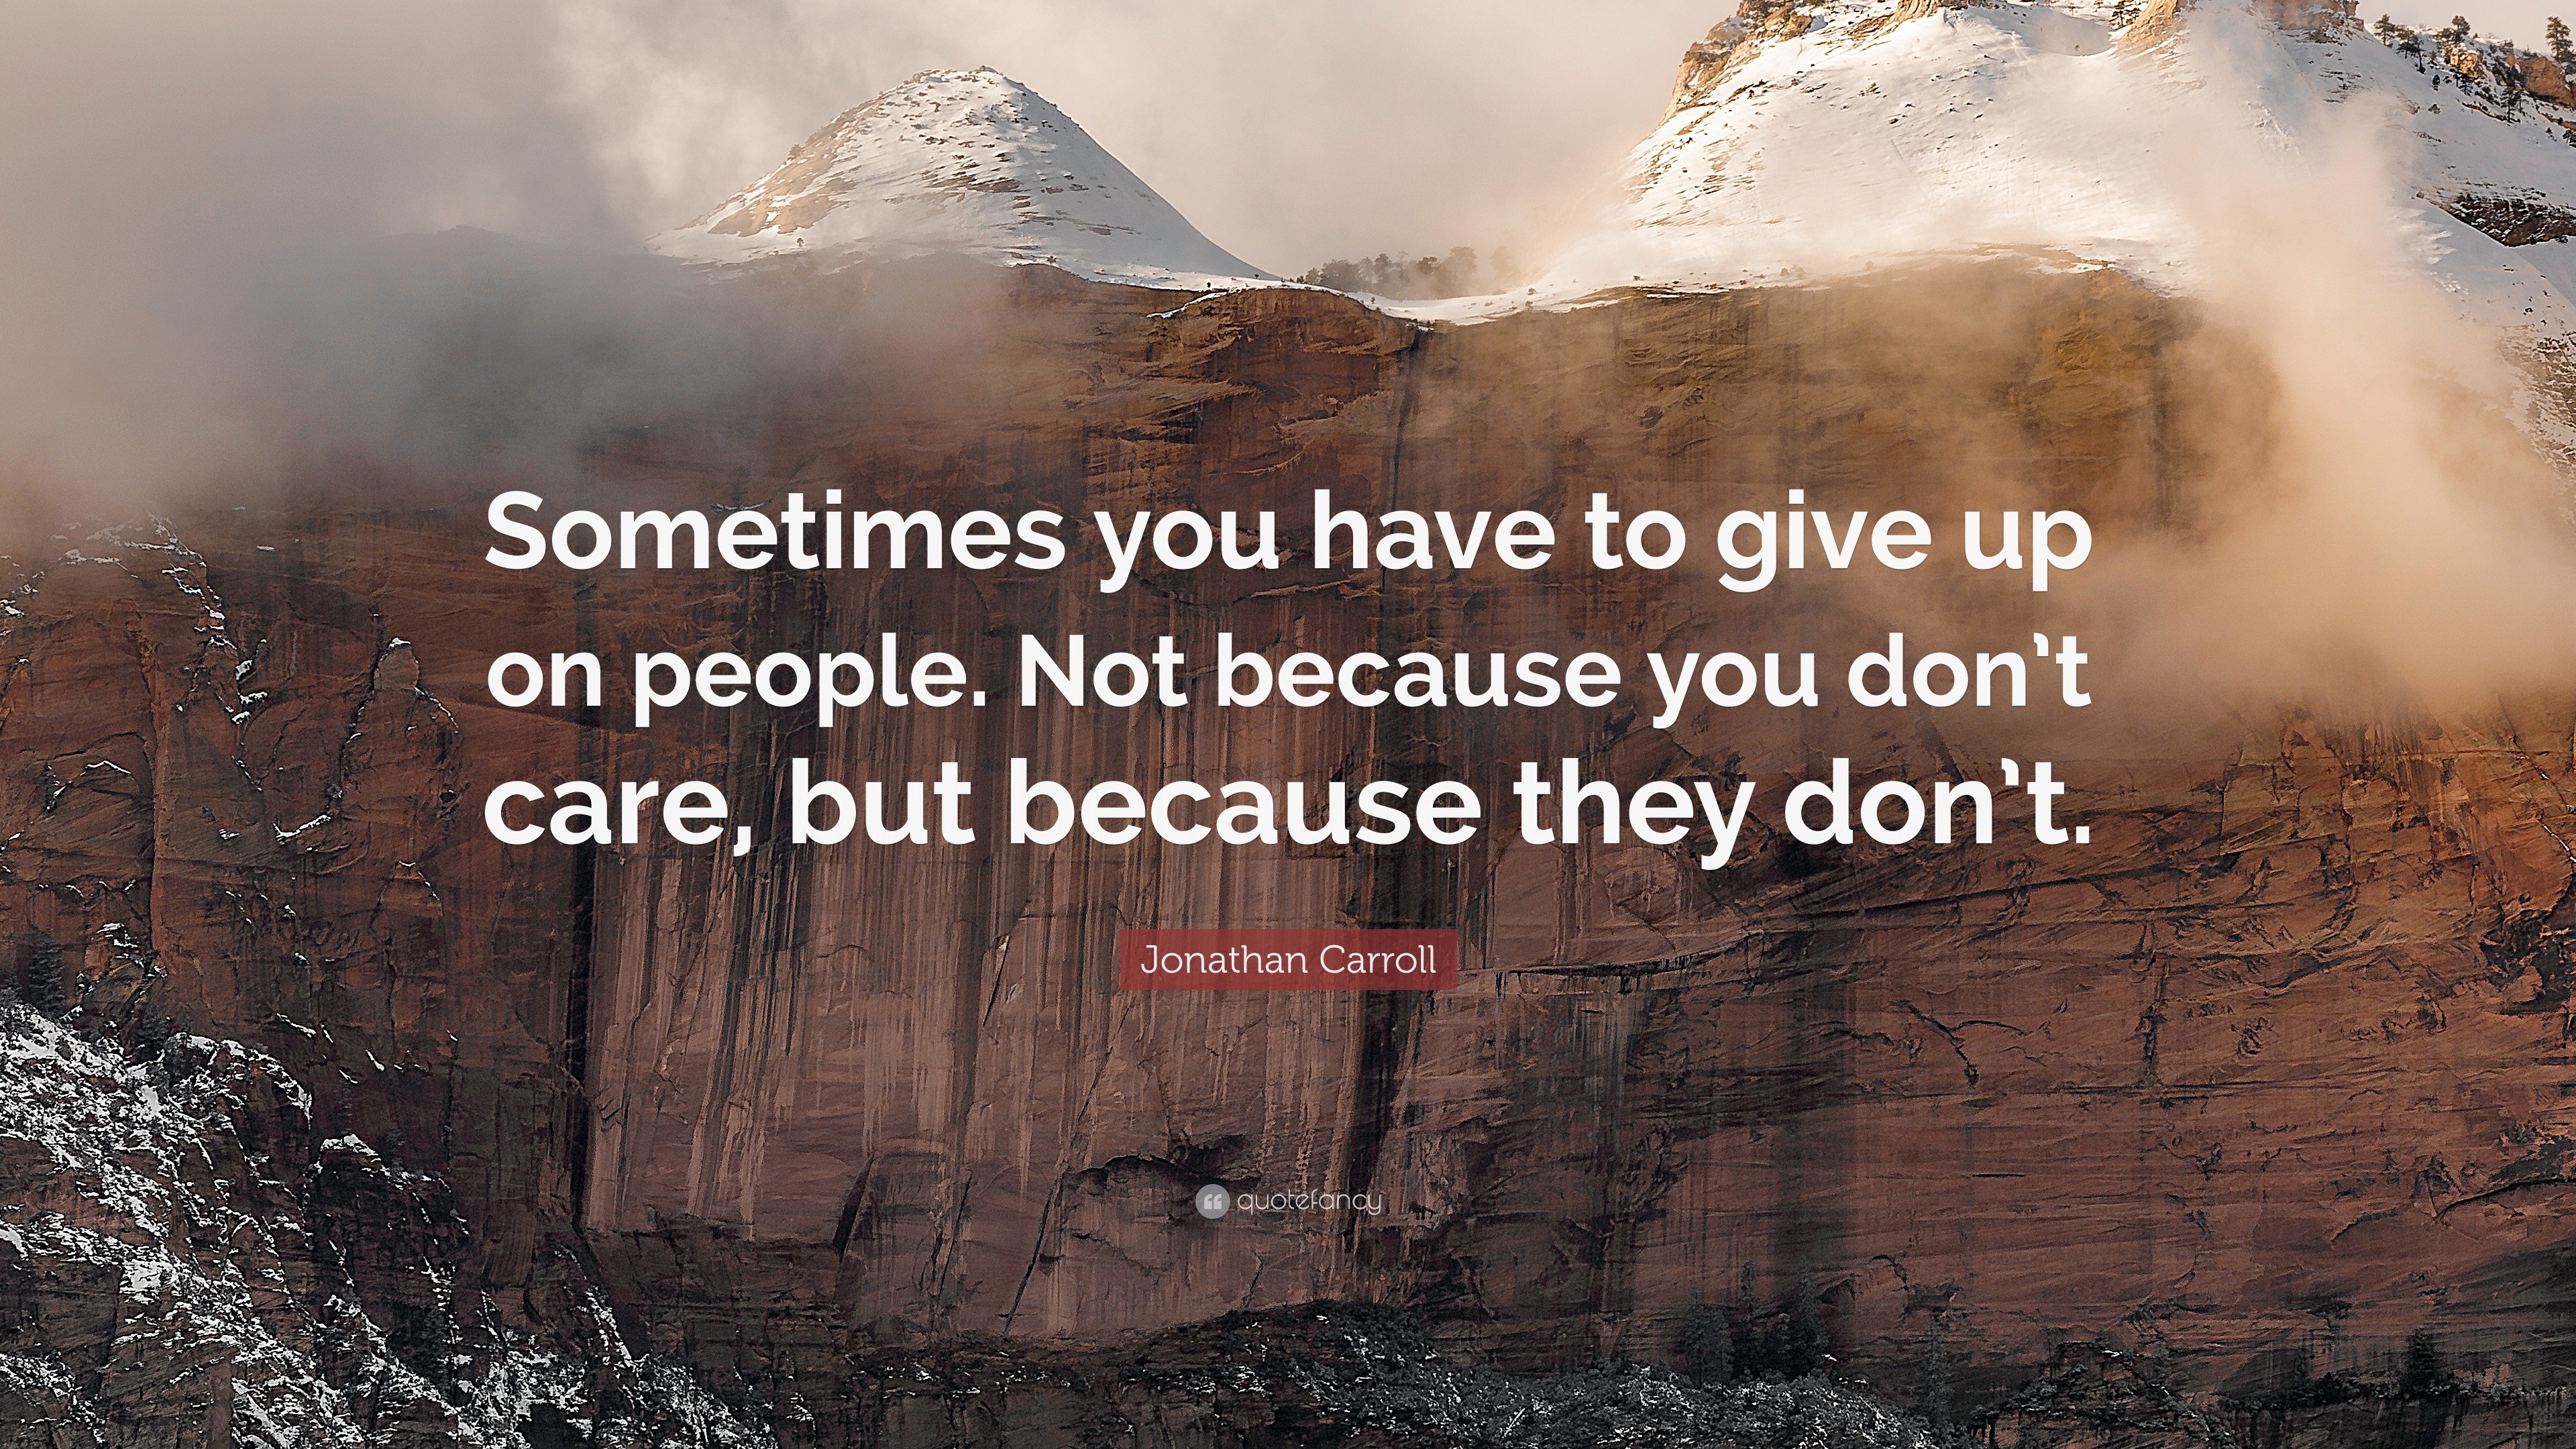 Jonathan Carroll Quote: “Sometimes you have to give up on people. Not ...